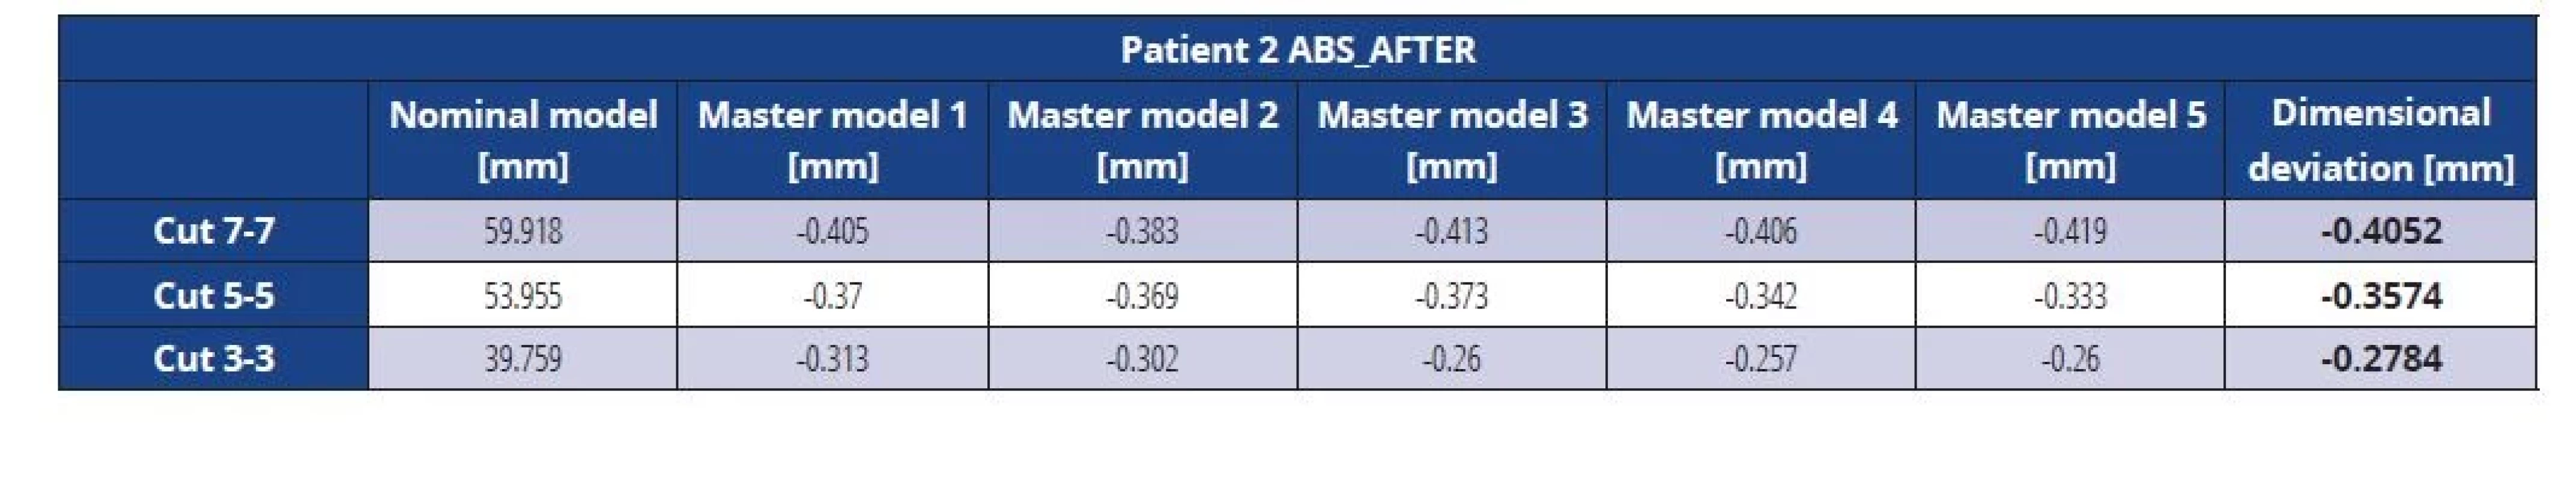 Dimensional deviations of the ABS master model after vacuuming (patient 2)